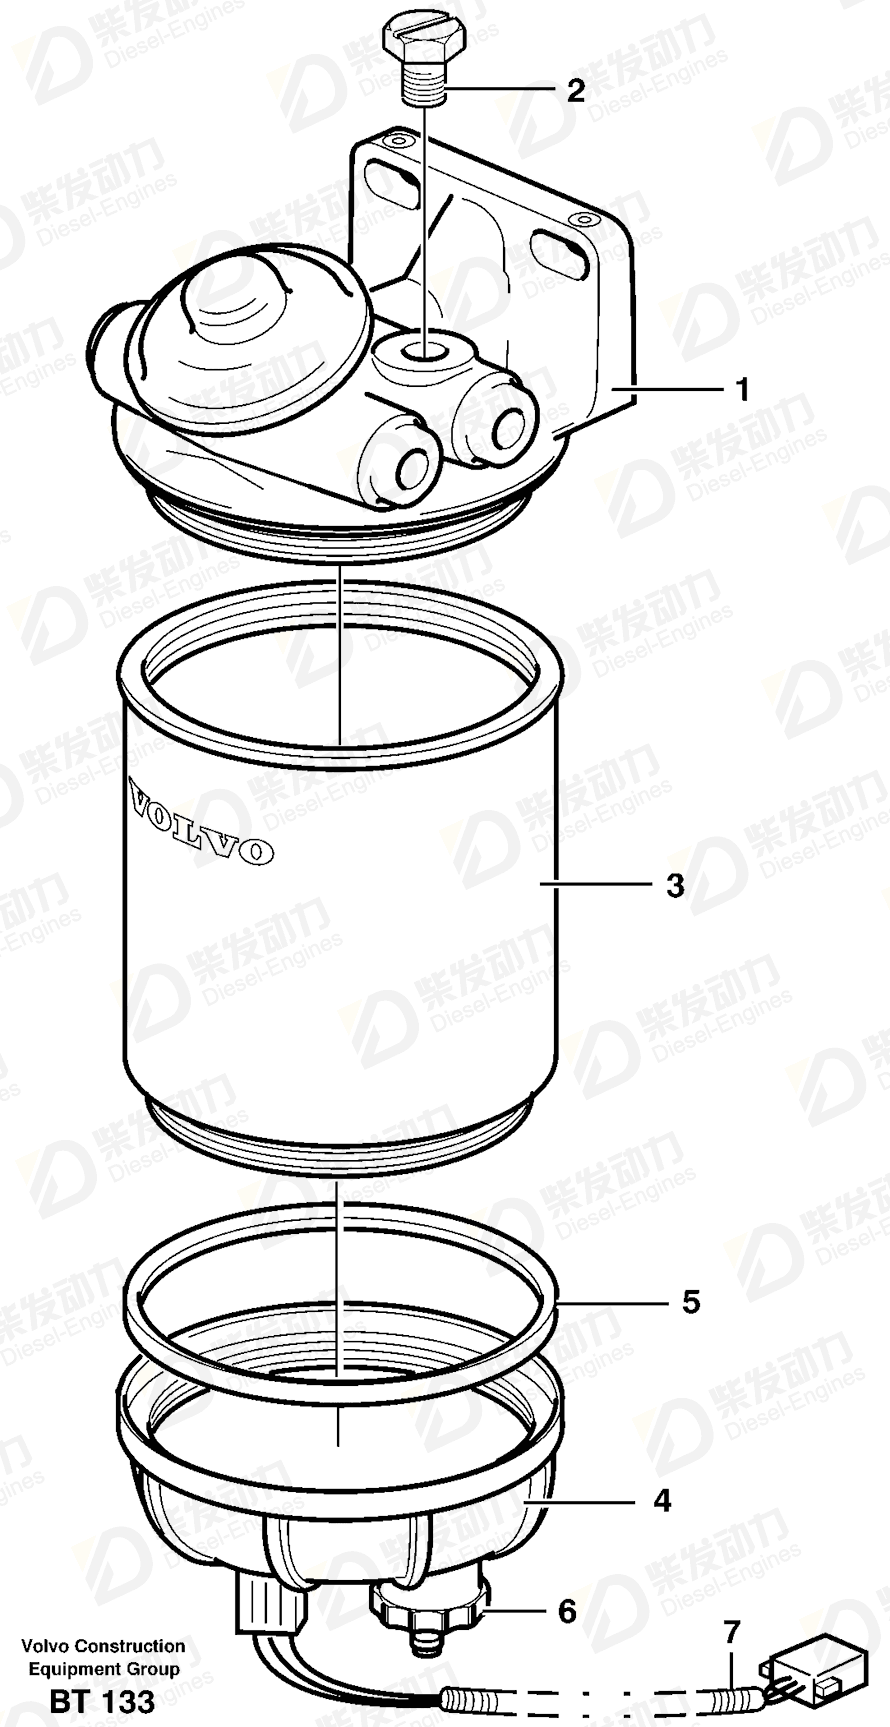 VOLVO Filter cover 11707557 Drawing